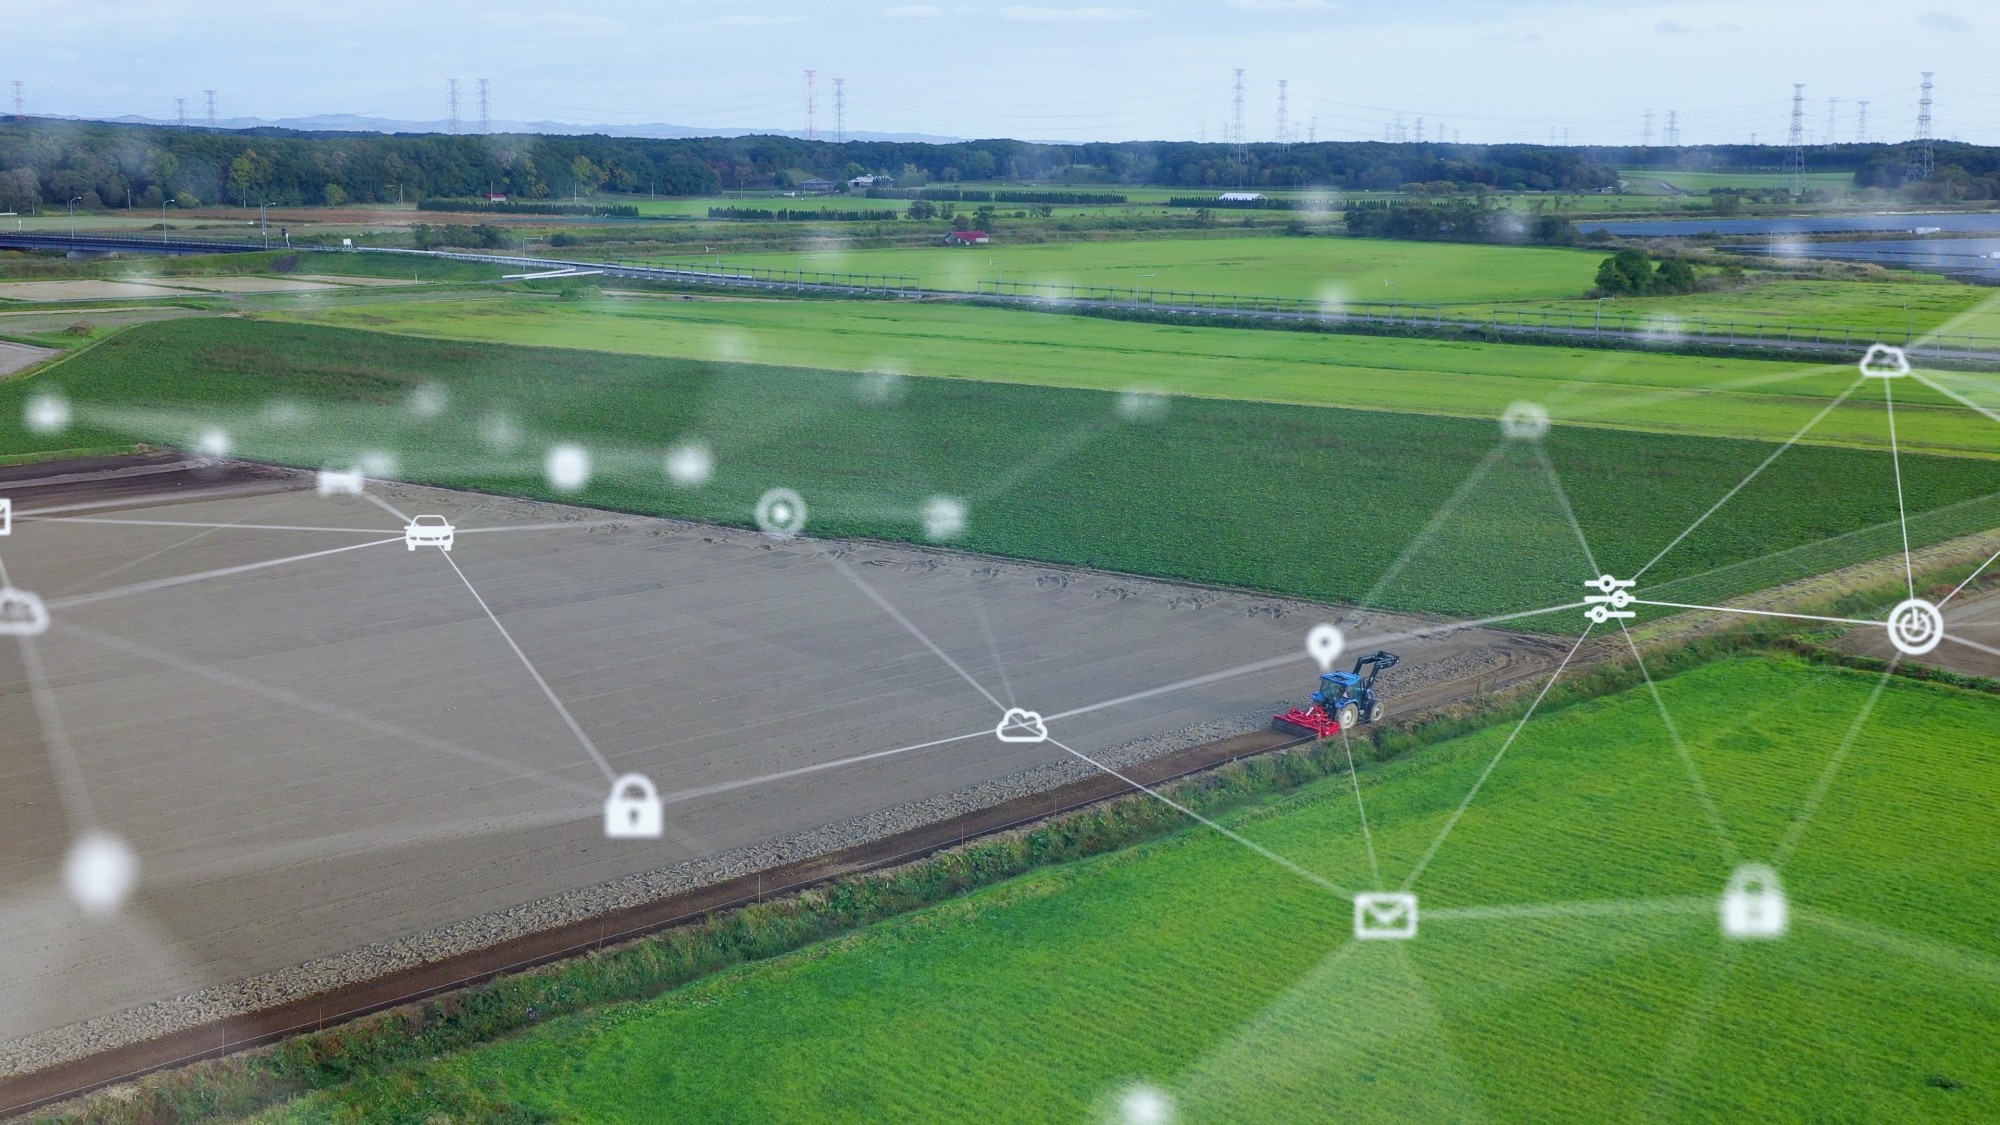 A farm superimposed with a graphic demonstrating remote sensing data acquisition and how it can be used for precision agriculture in future